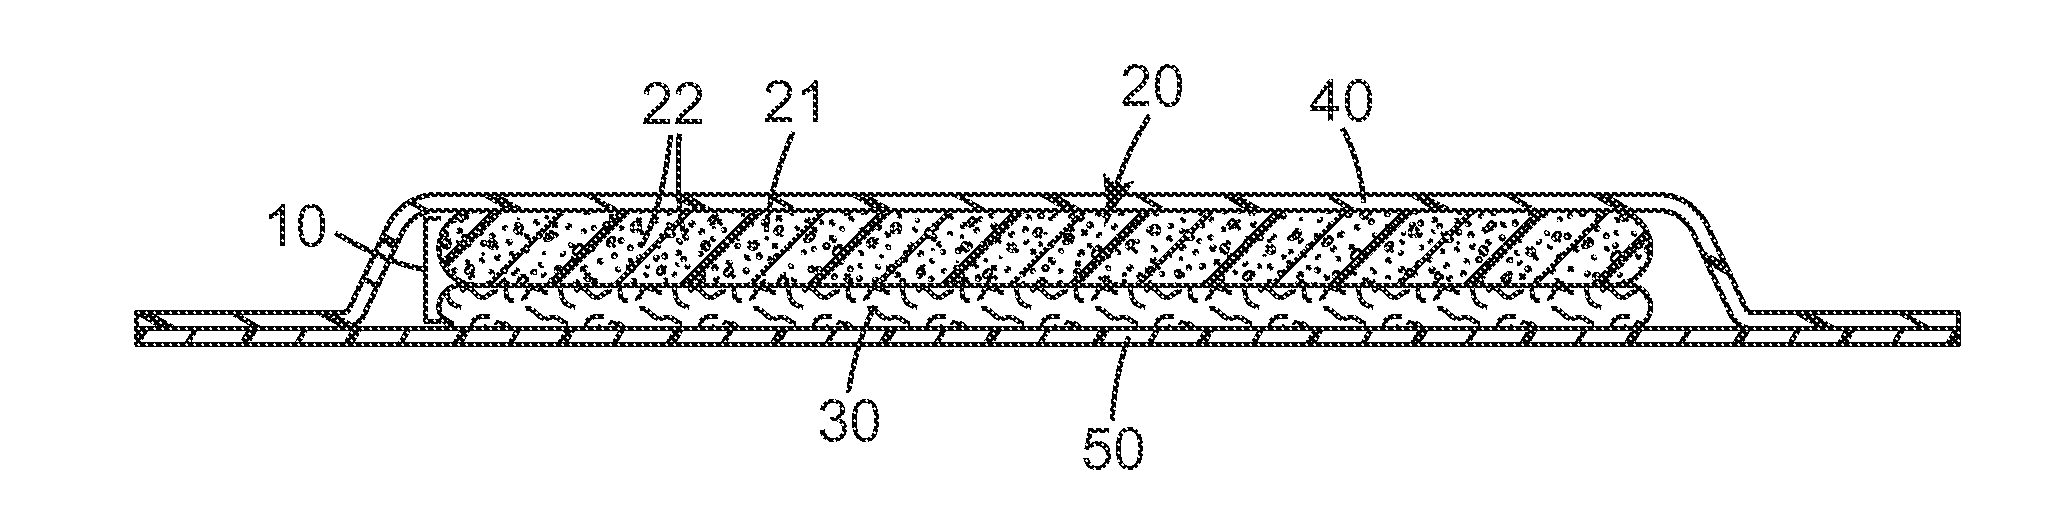 Absorbent article comprising polymeric foam with superabsorbent and intermediates